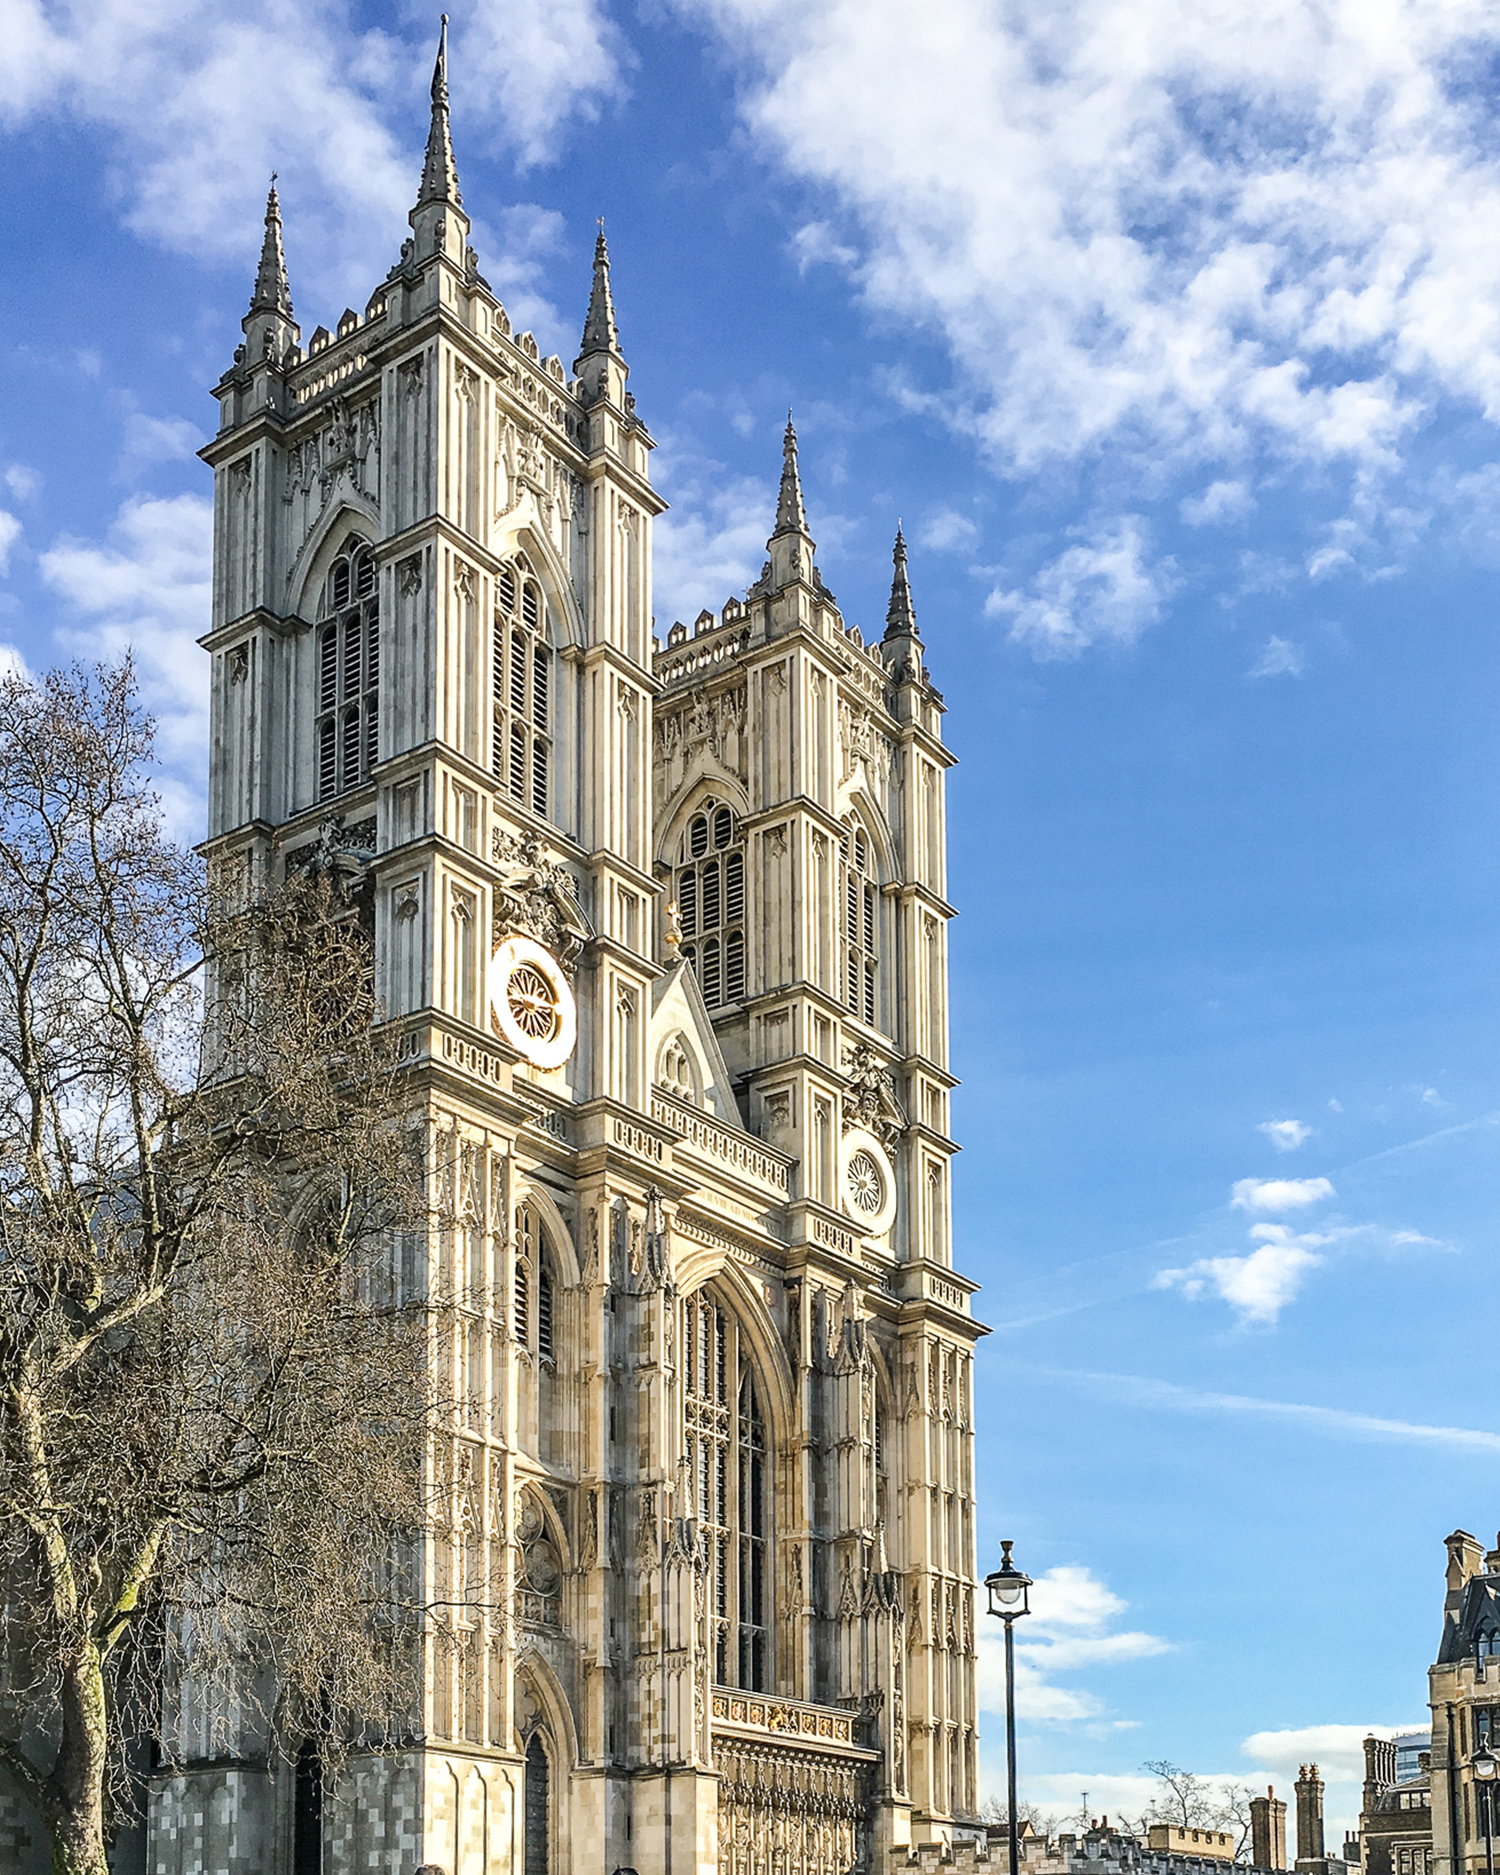 Westminster Abbey
